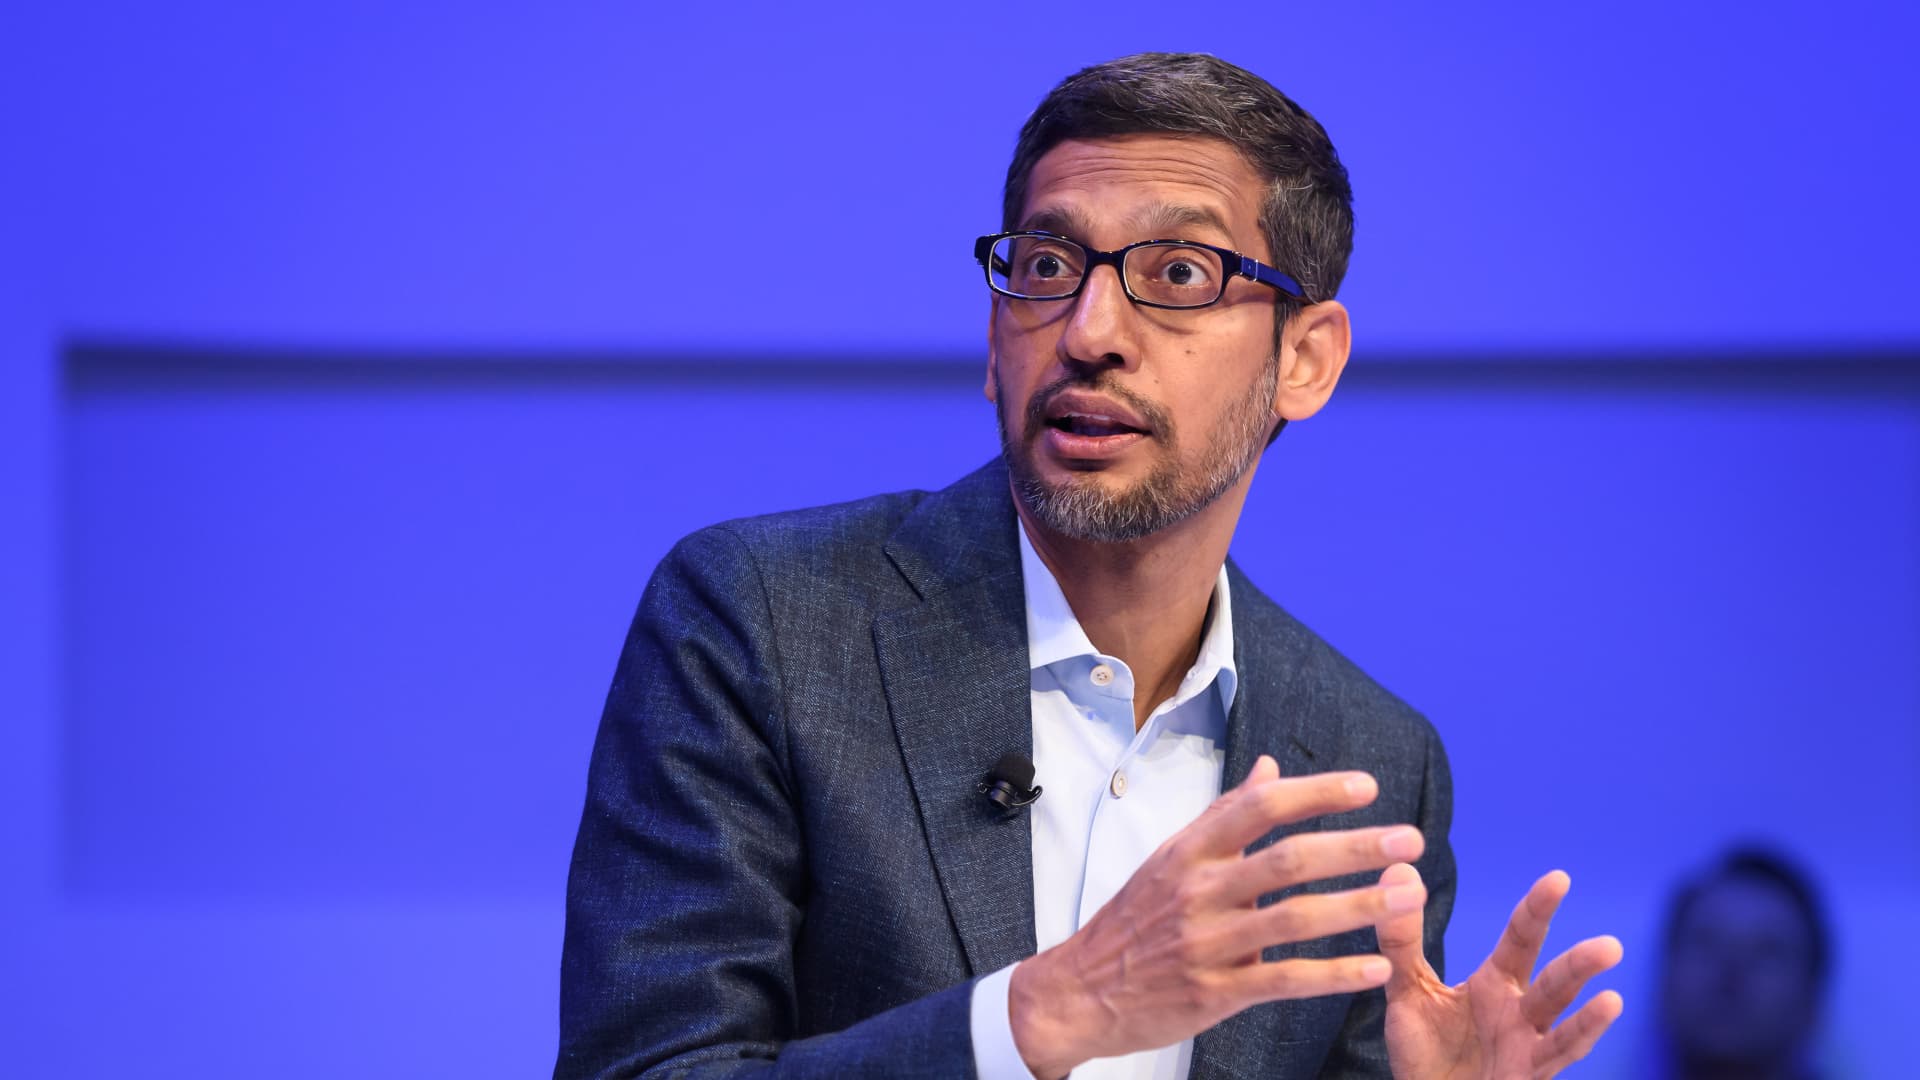 Google CEO addresses employee concerns over loss of candor and honesty